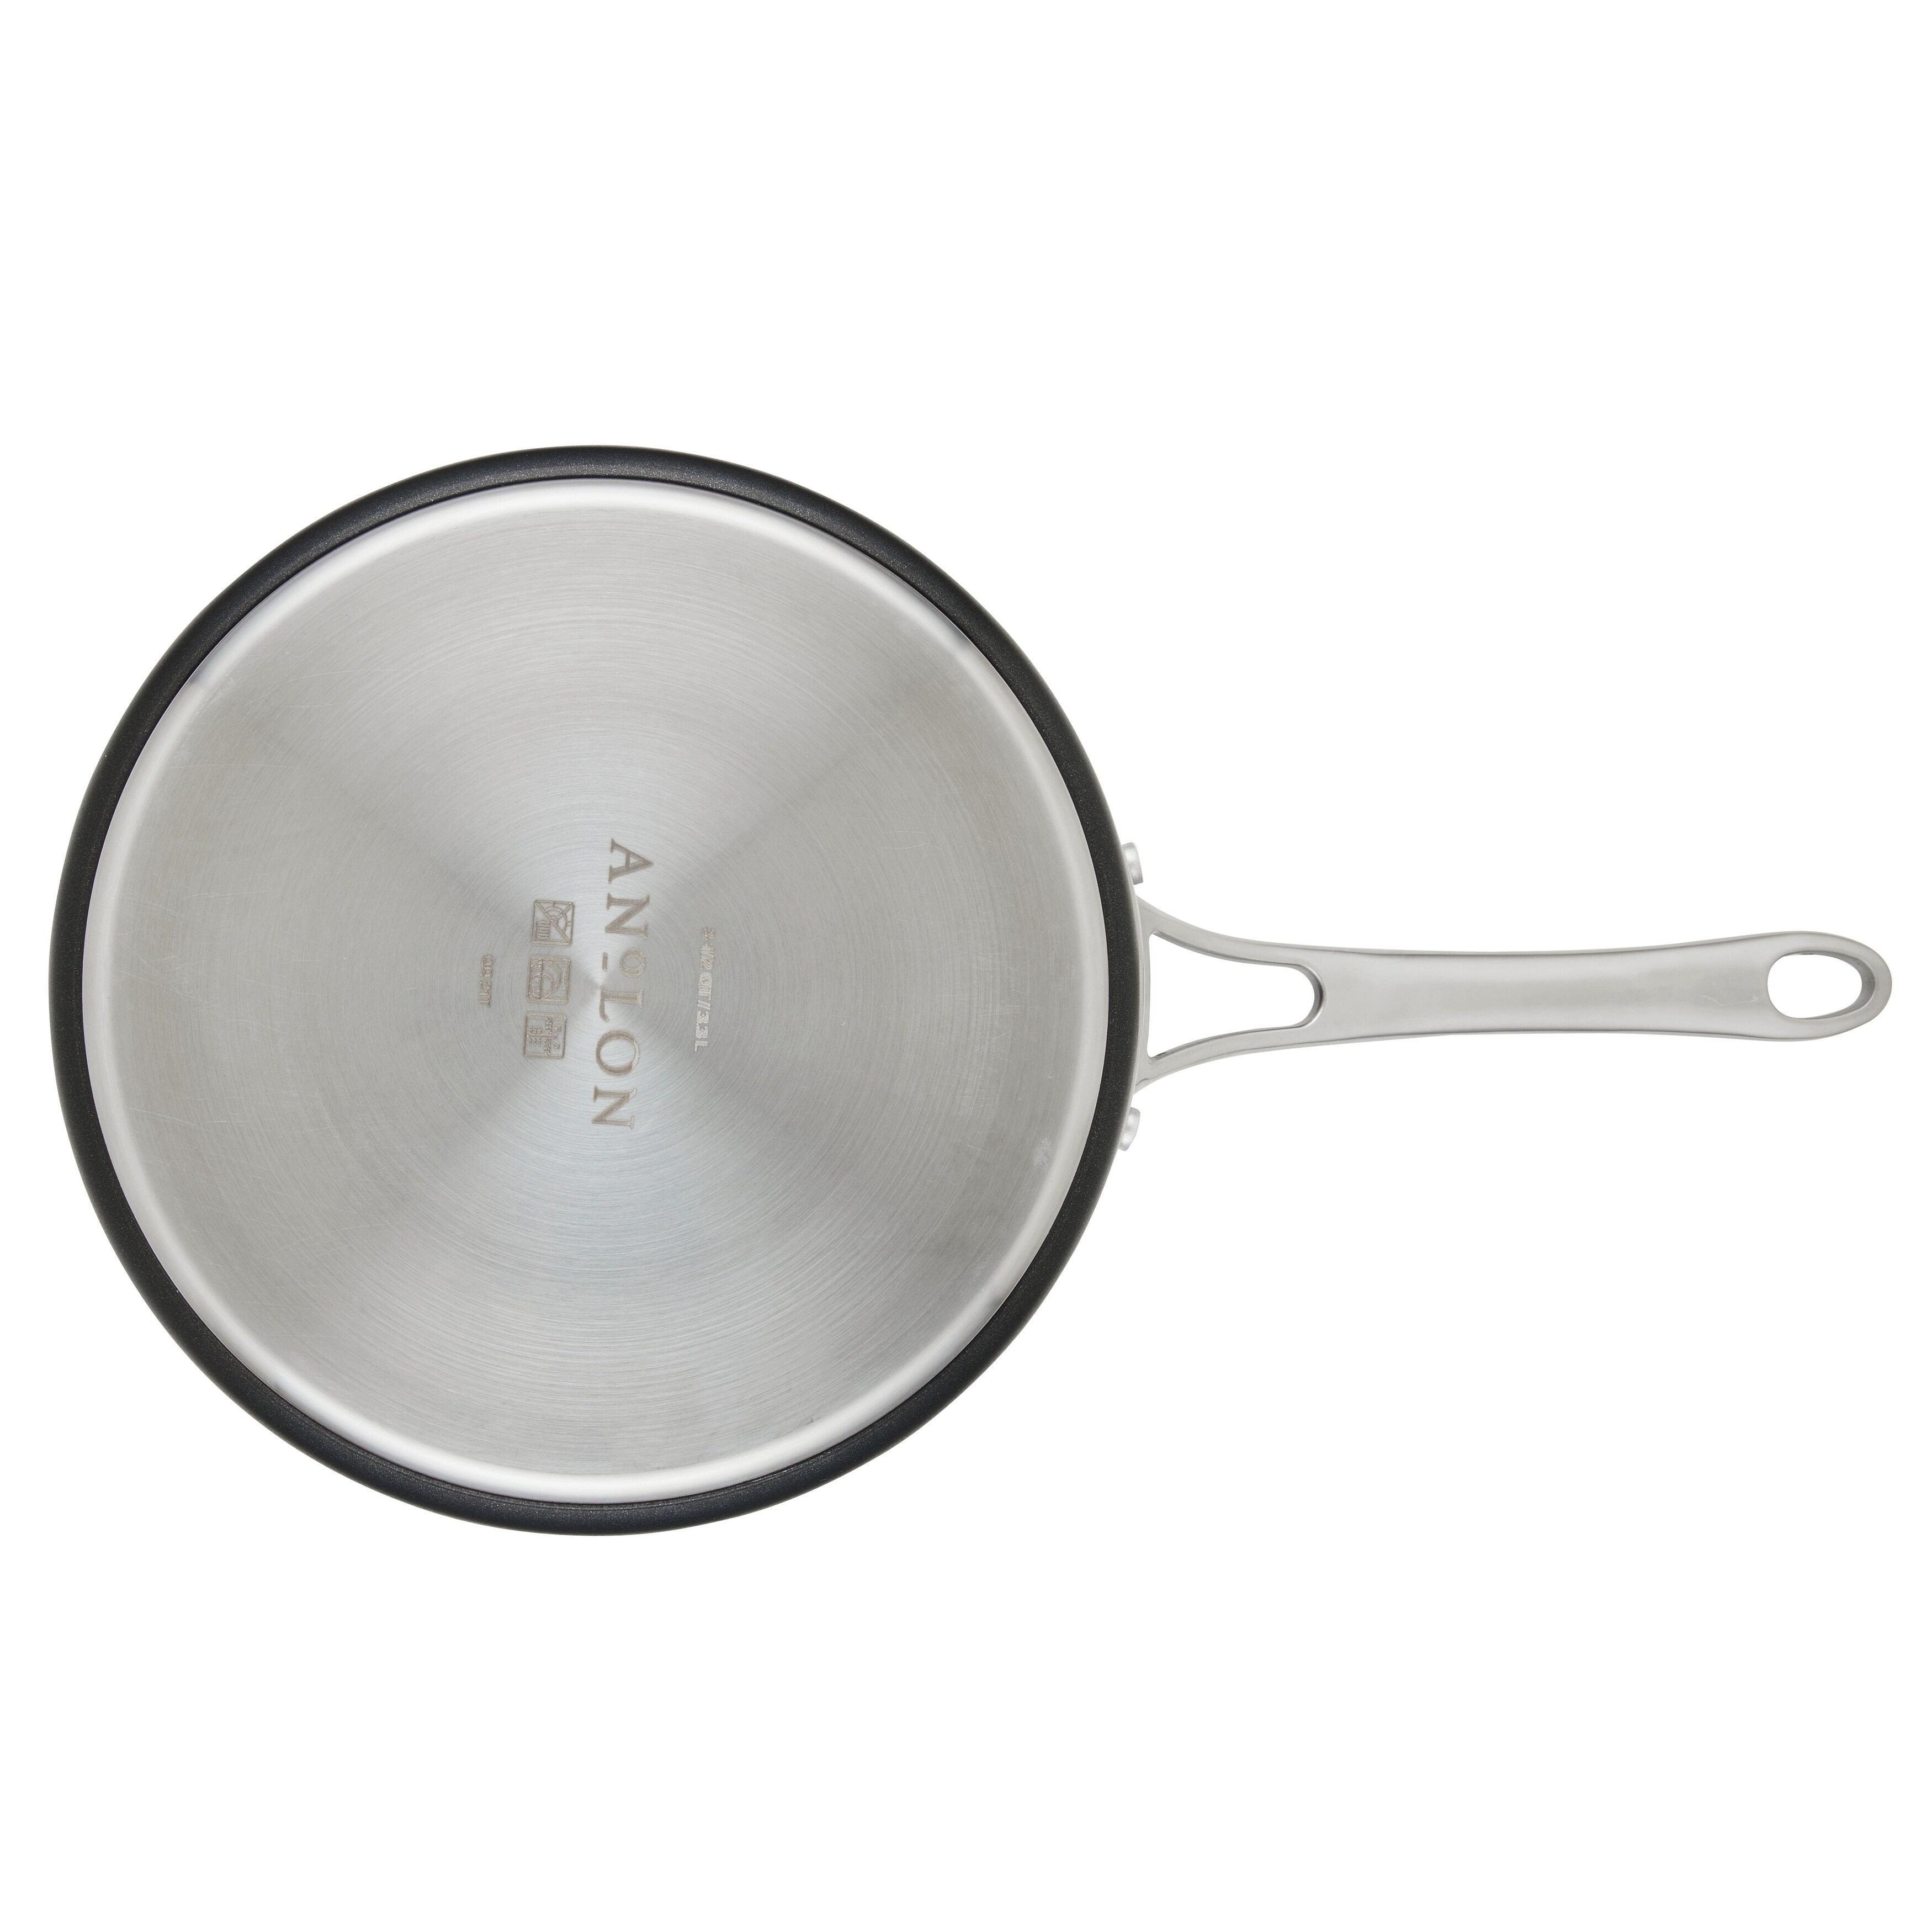  Anolon X SearTech Aluminum Nonstick Frying Pan with